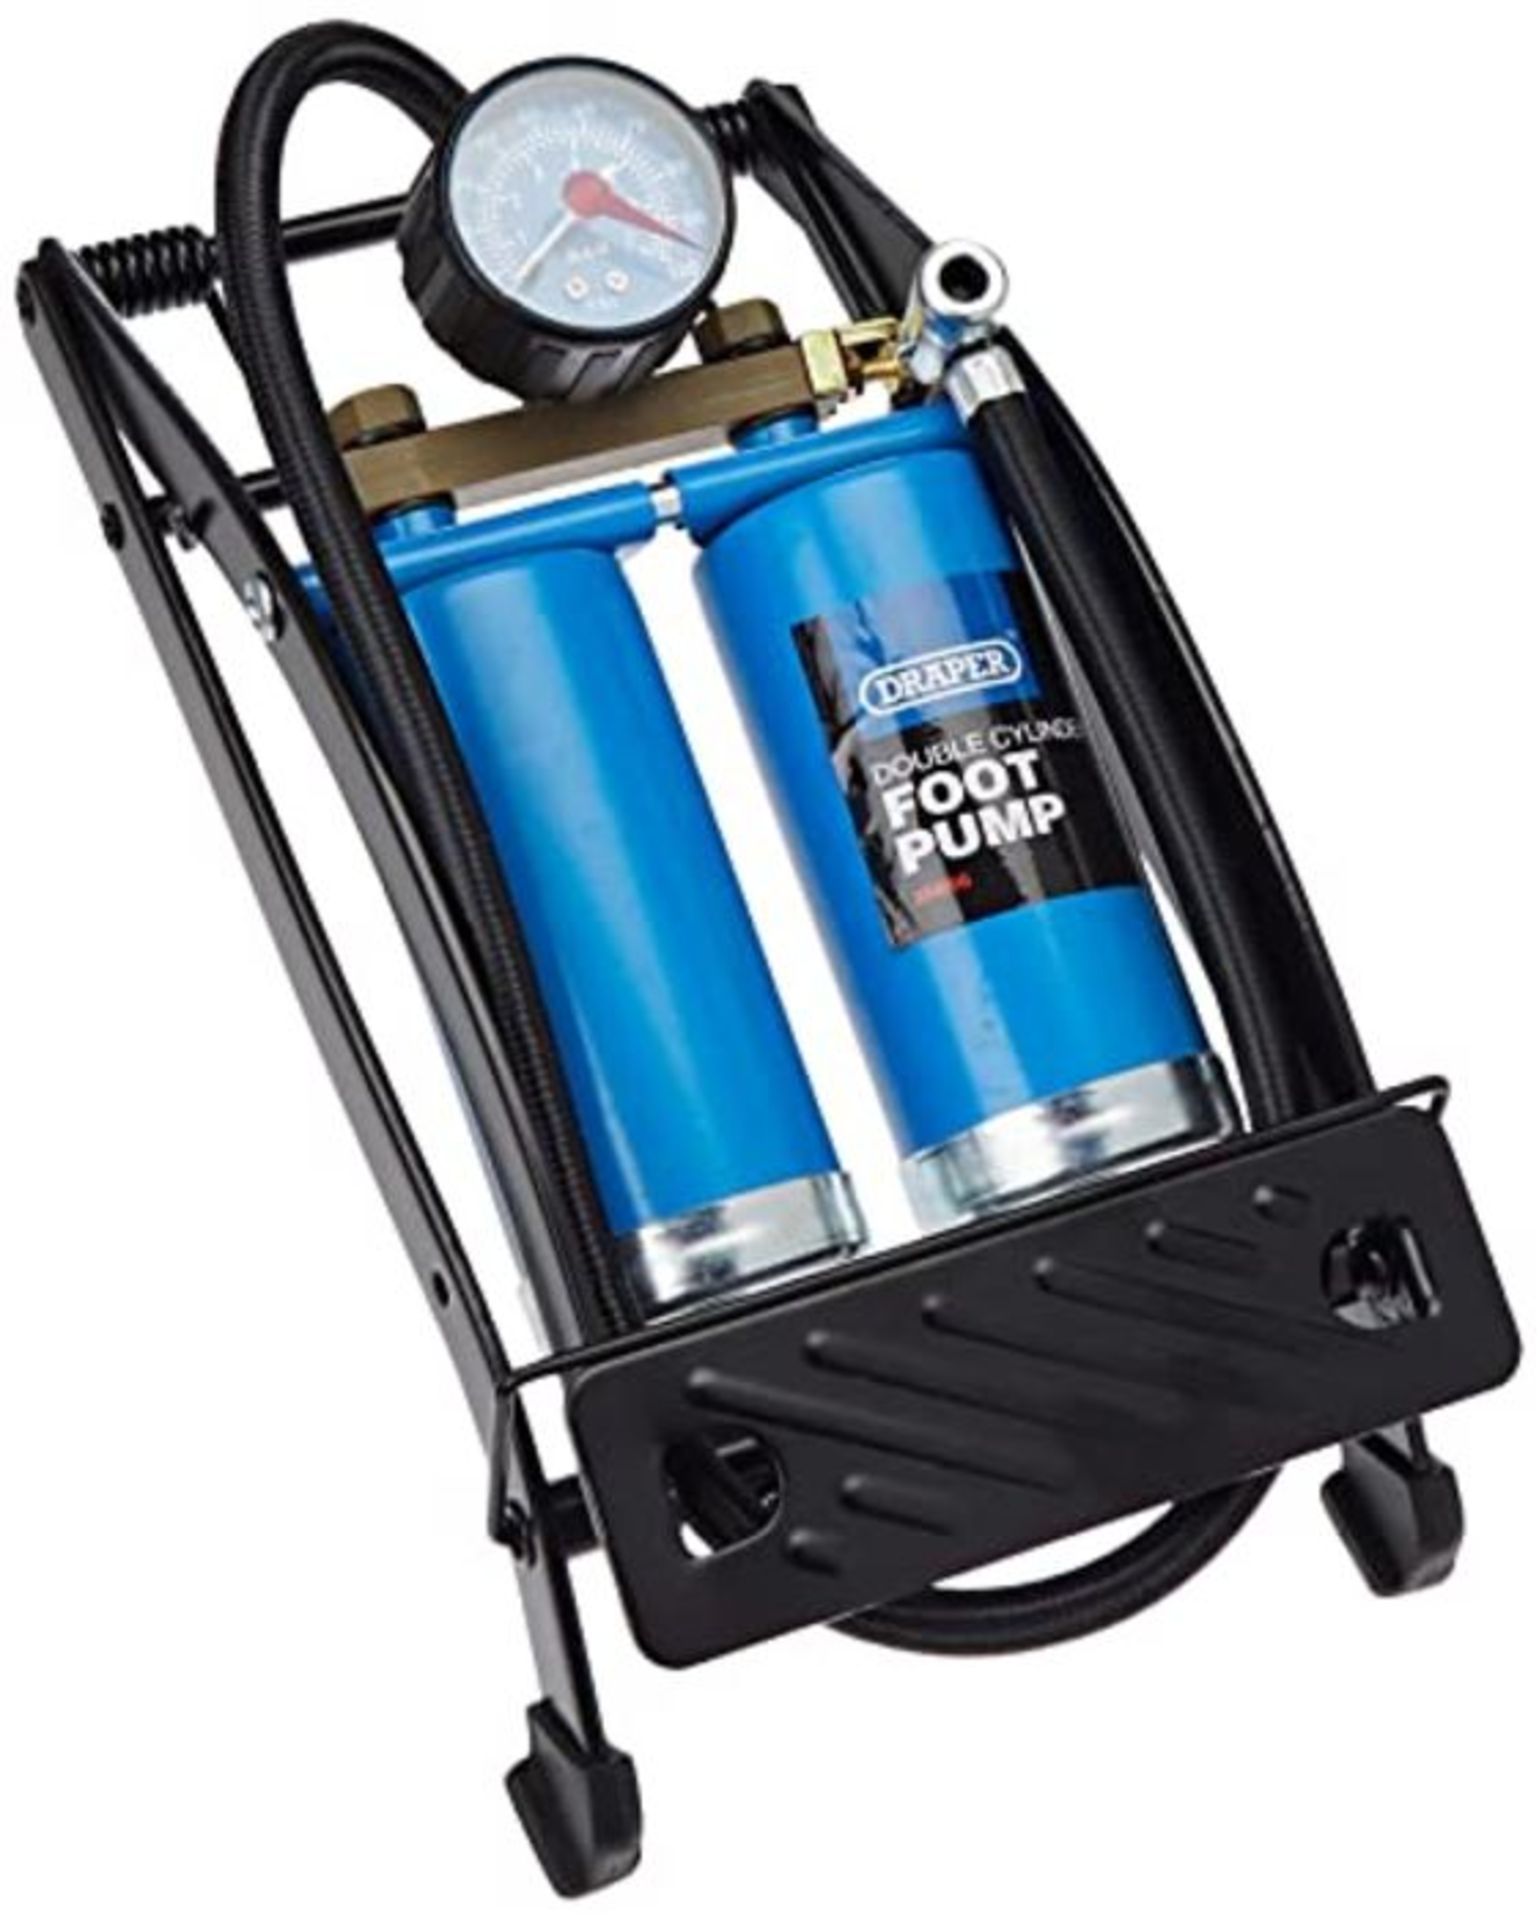 Draper 25996 Double Twin Cylinder Foot Pump with Gauge 890004, Blue